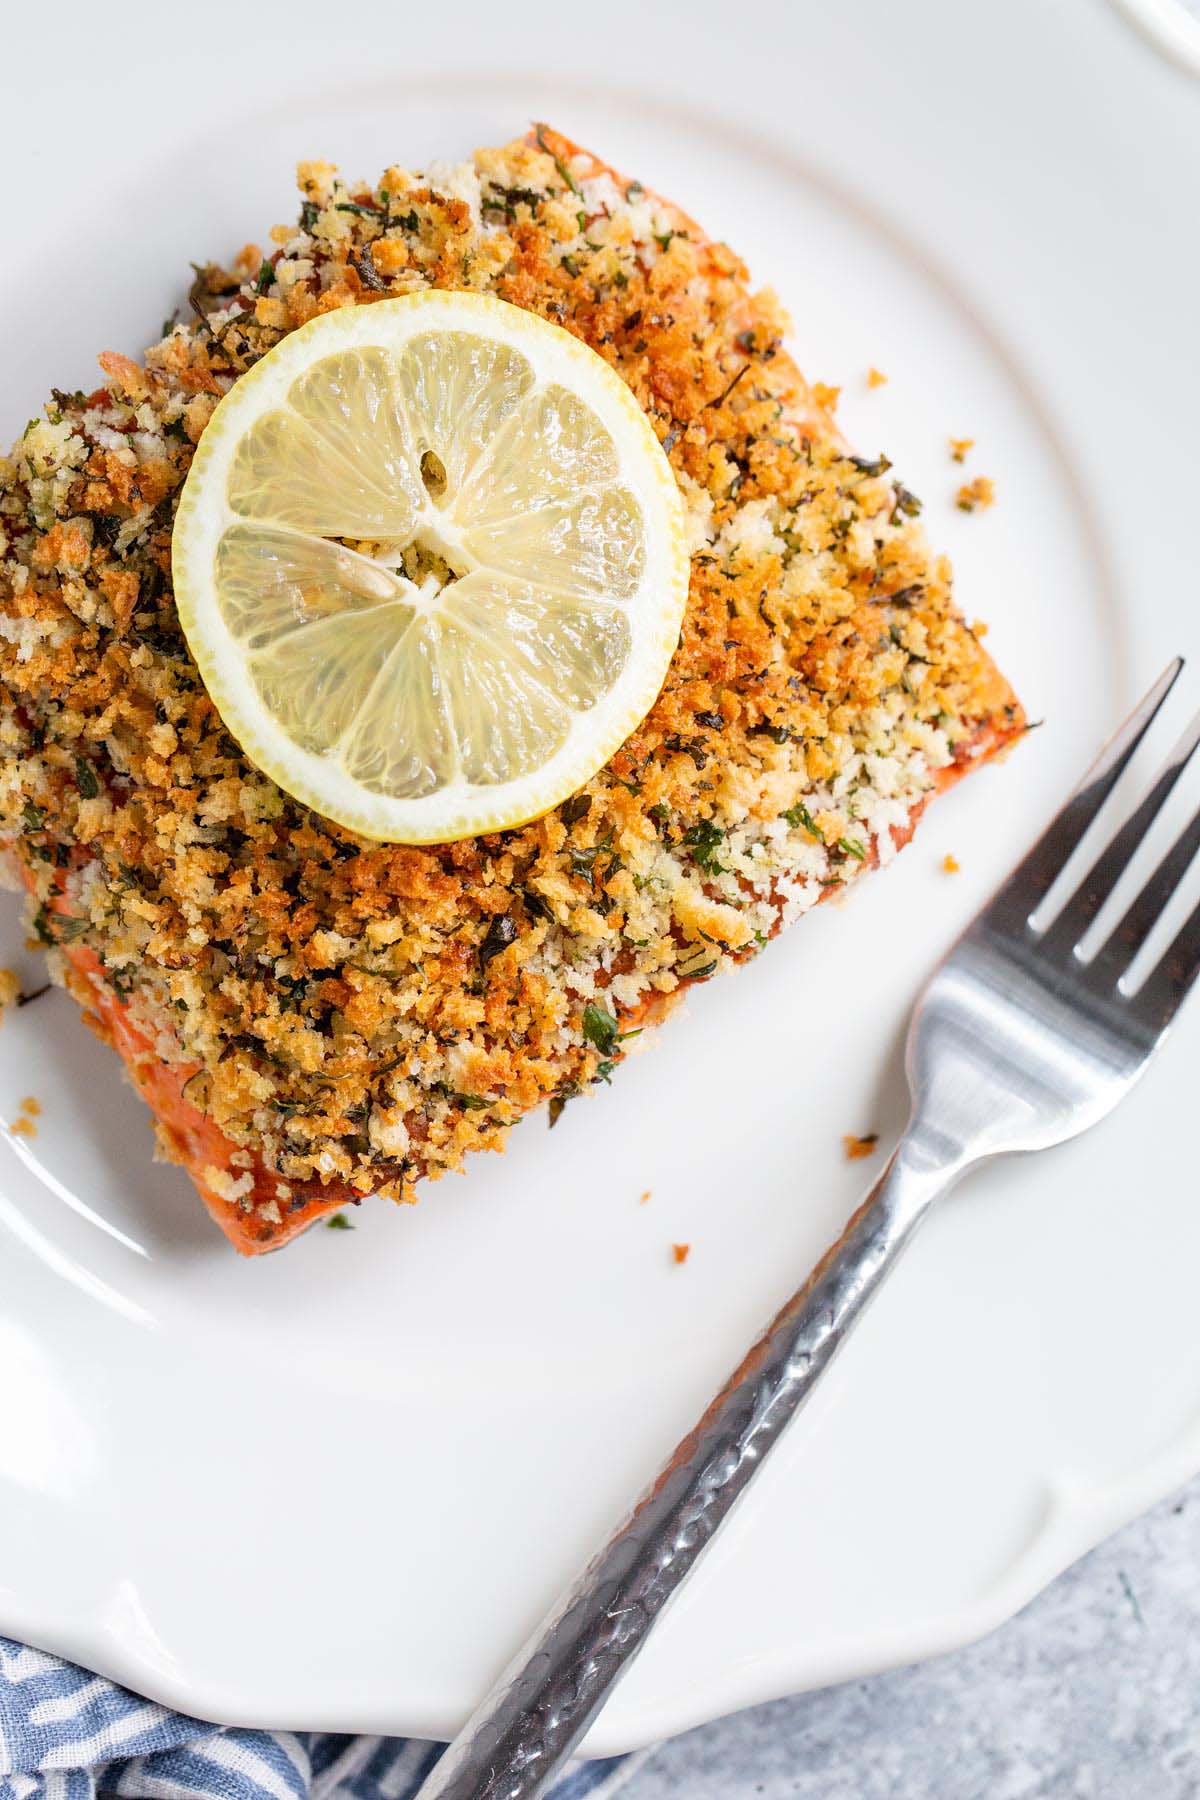 Panko crusted salmon on a plate with a lemon slice.